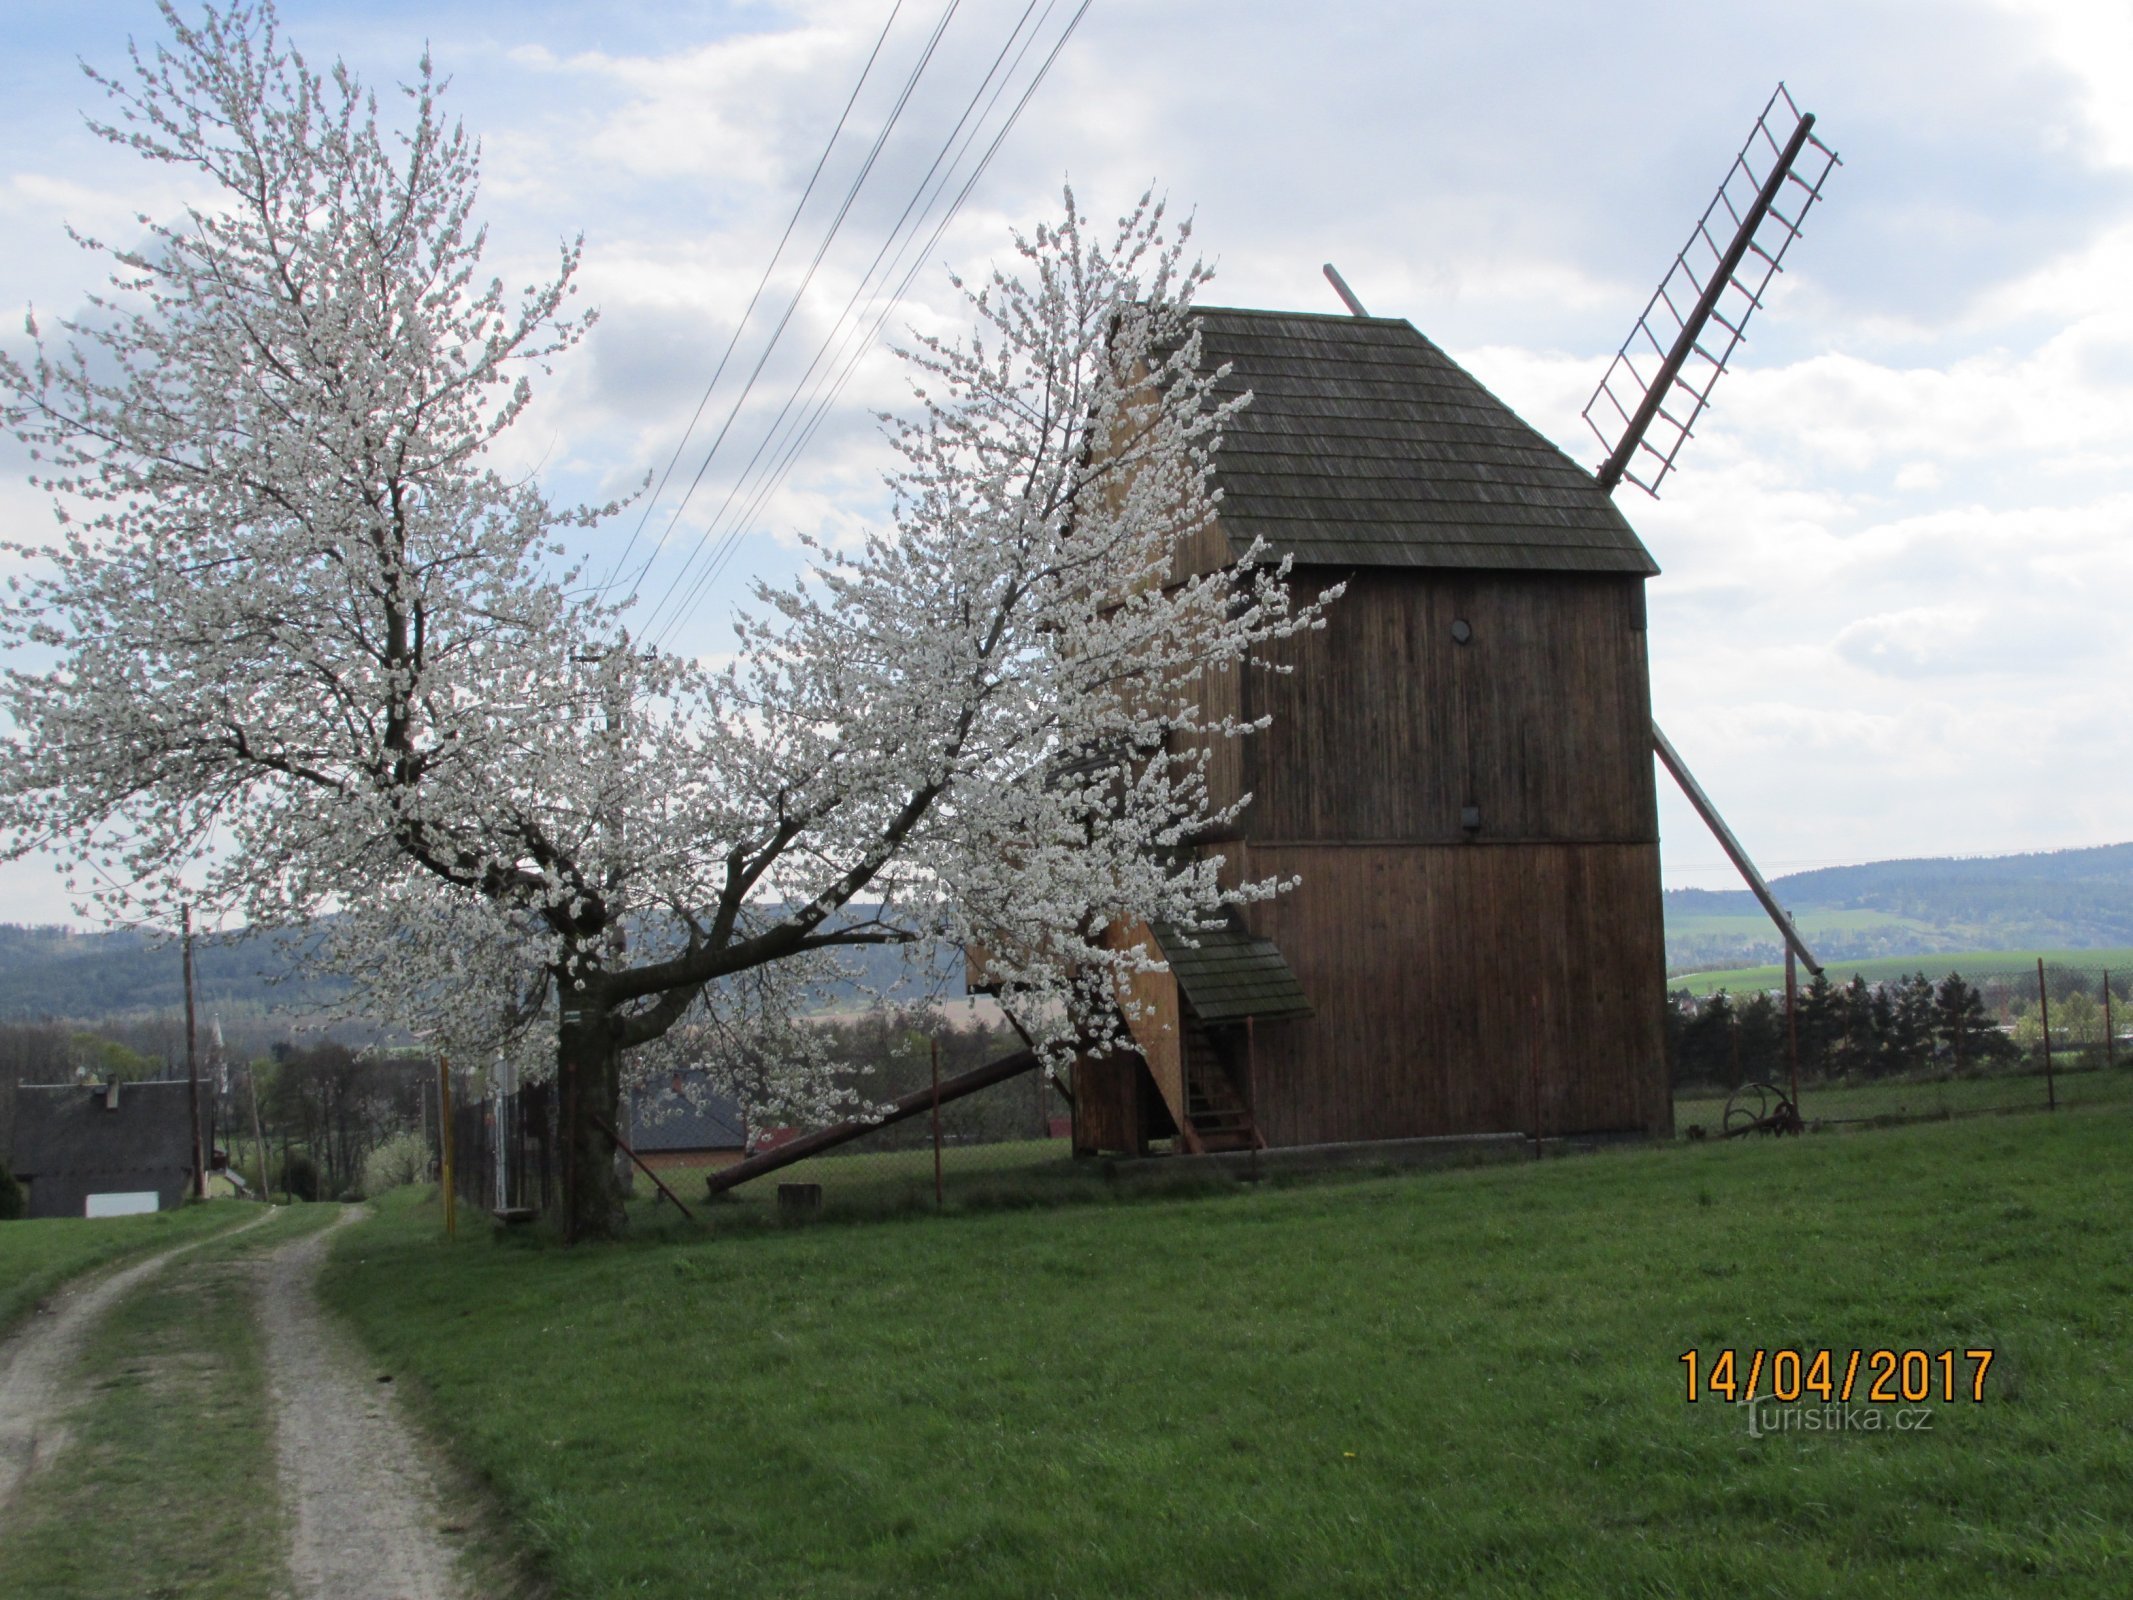 Windmill in Choltice